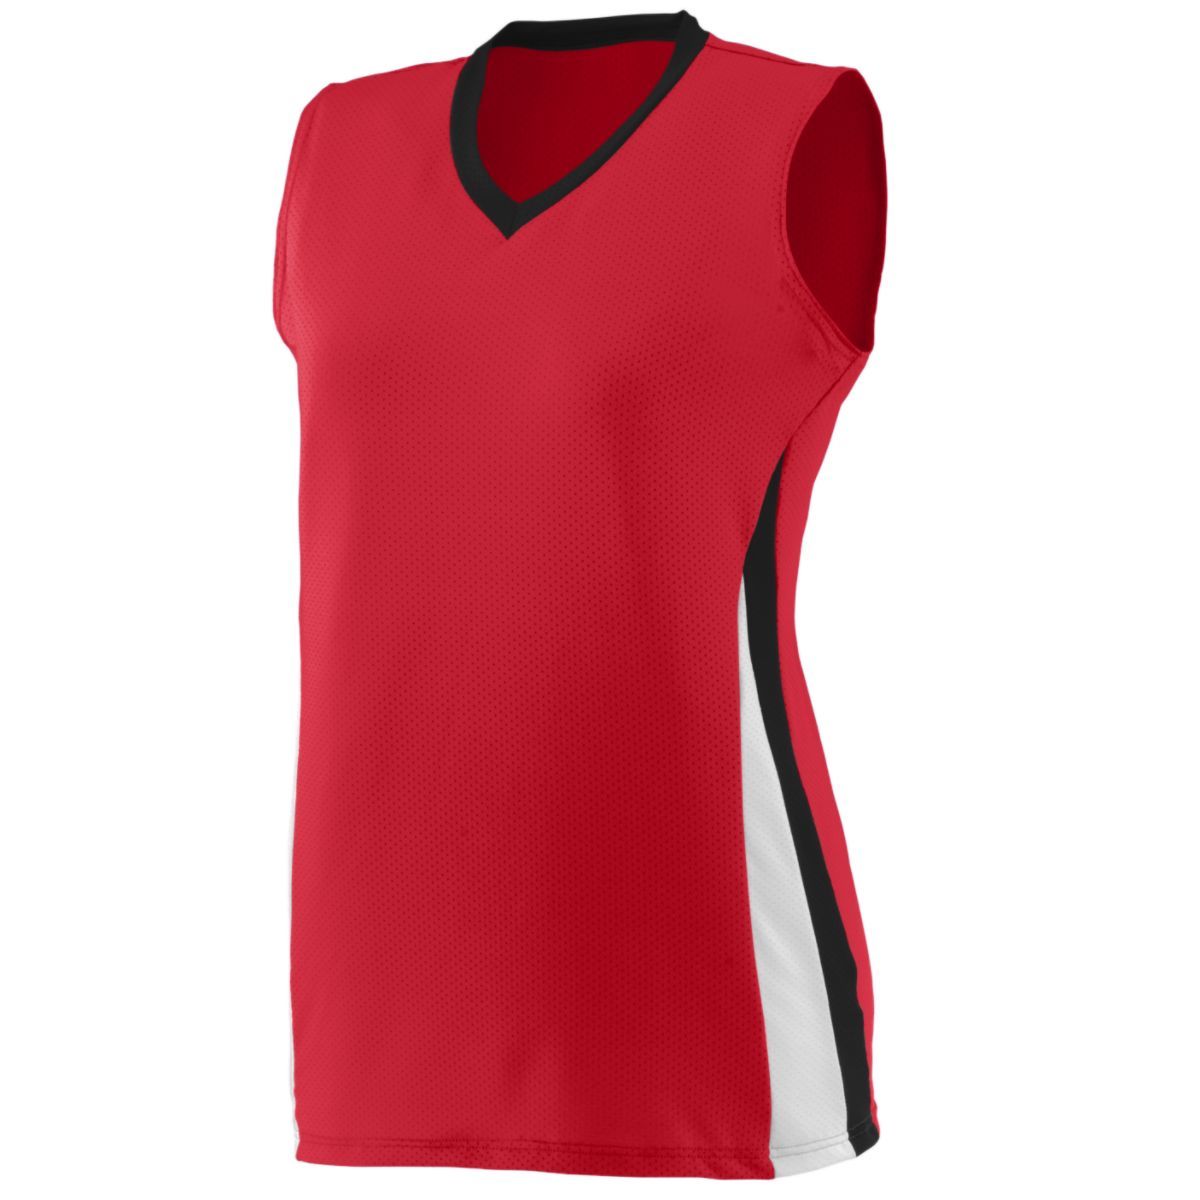 Augusta Sportswear Ladies Tornado Jersey in Red/Black/White  -Part of the Ladies, Ladies-Jersey, Augusta-Products, Volleyball, Shirts product lines at KanaleyCreations.com